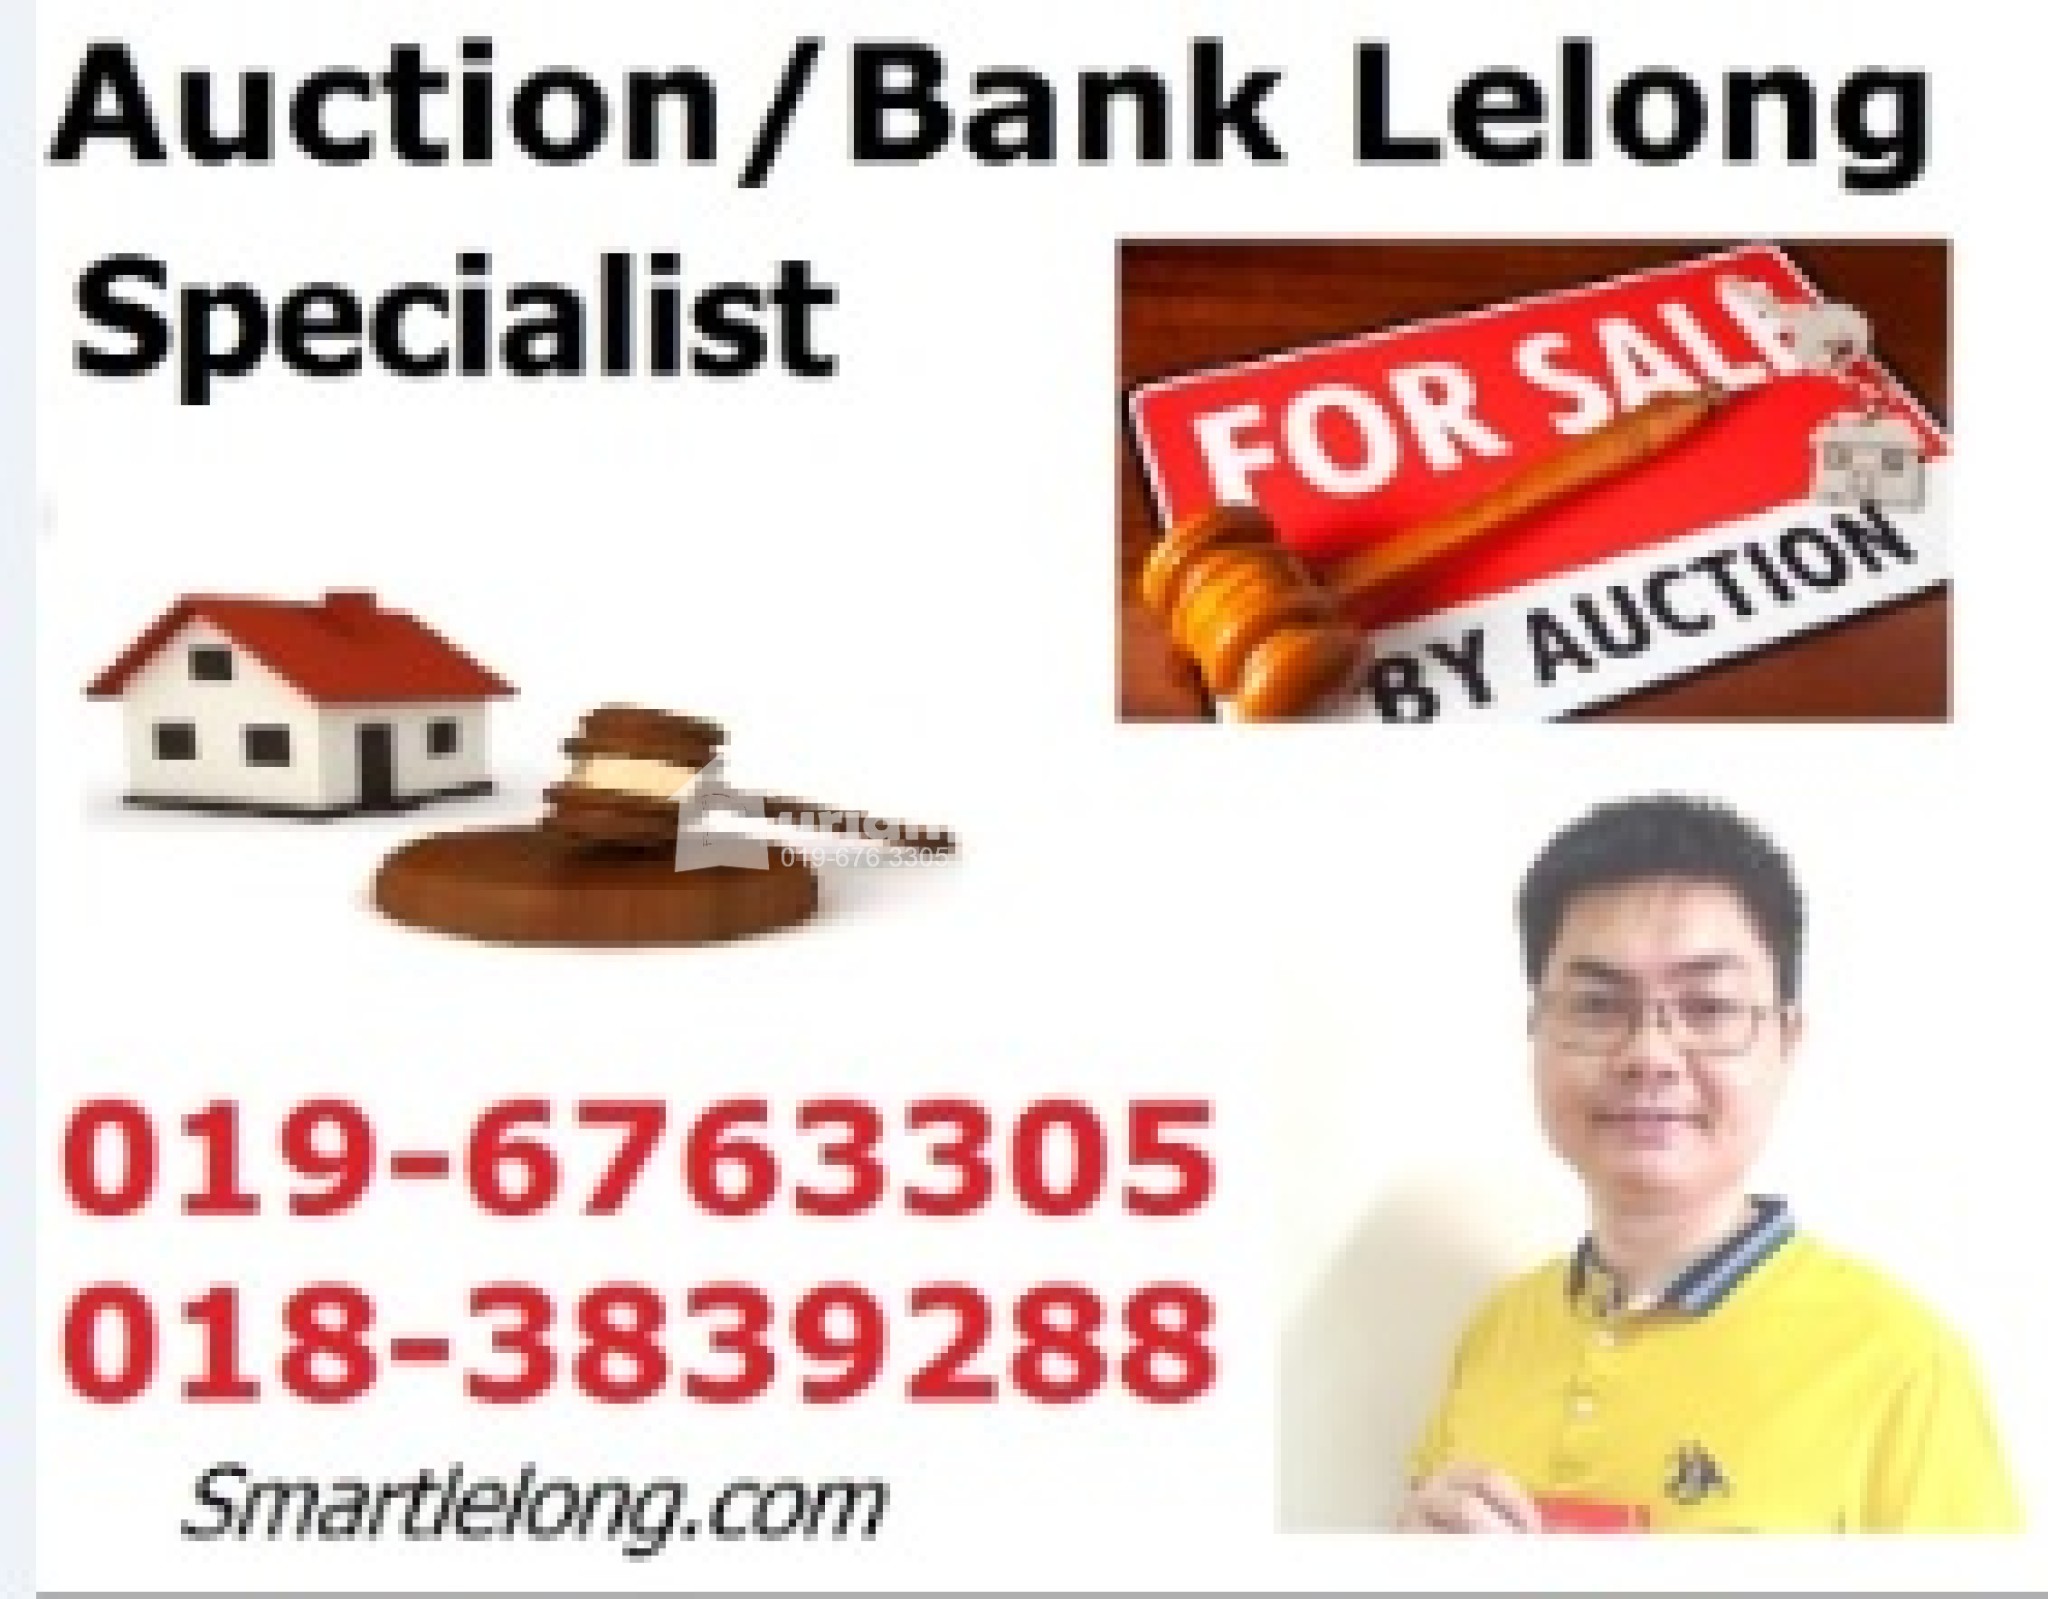 Terrace House For Auction at Kota Masai